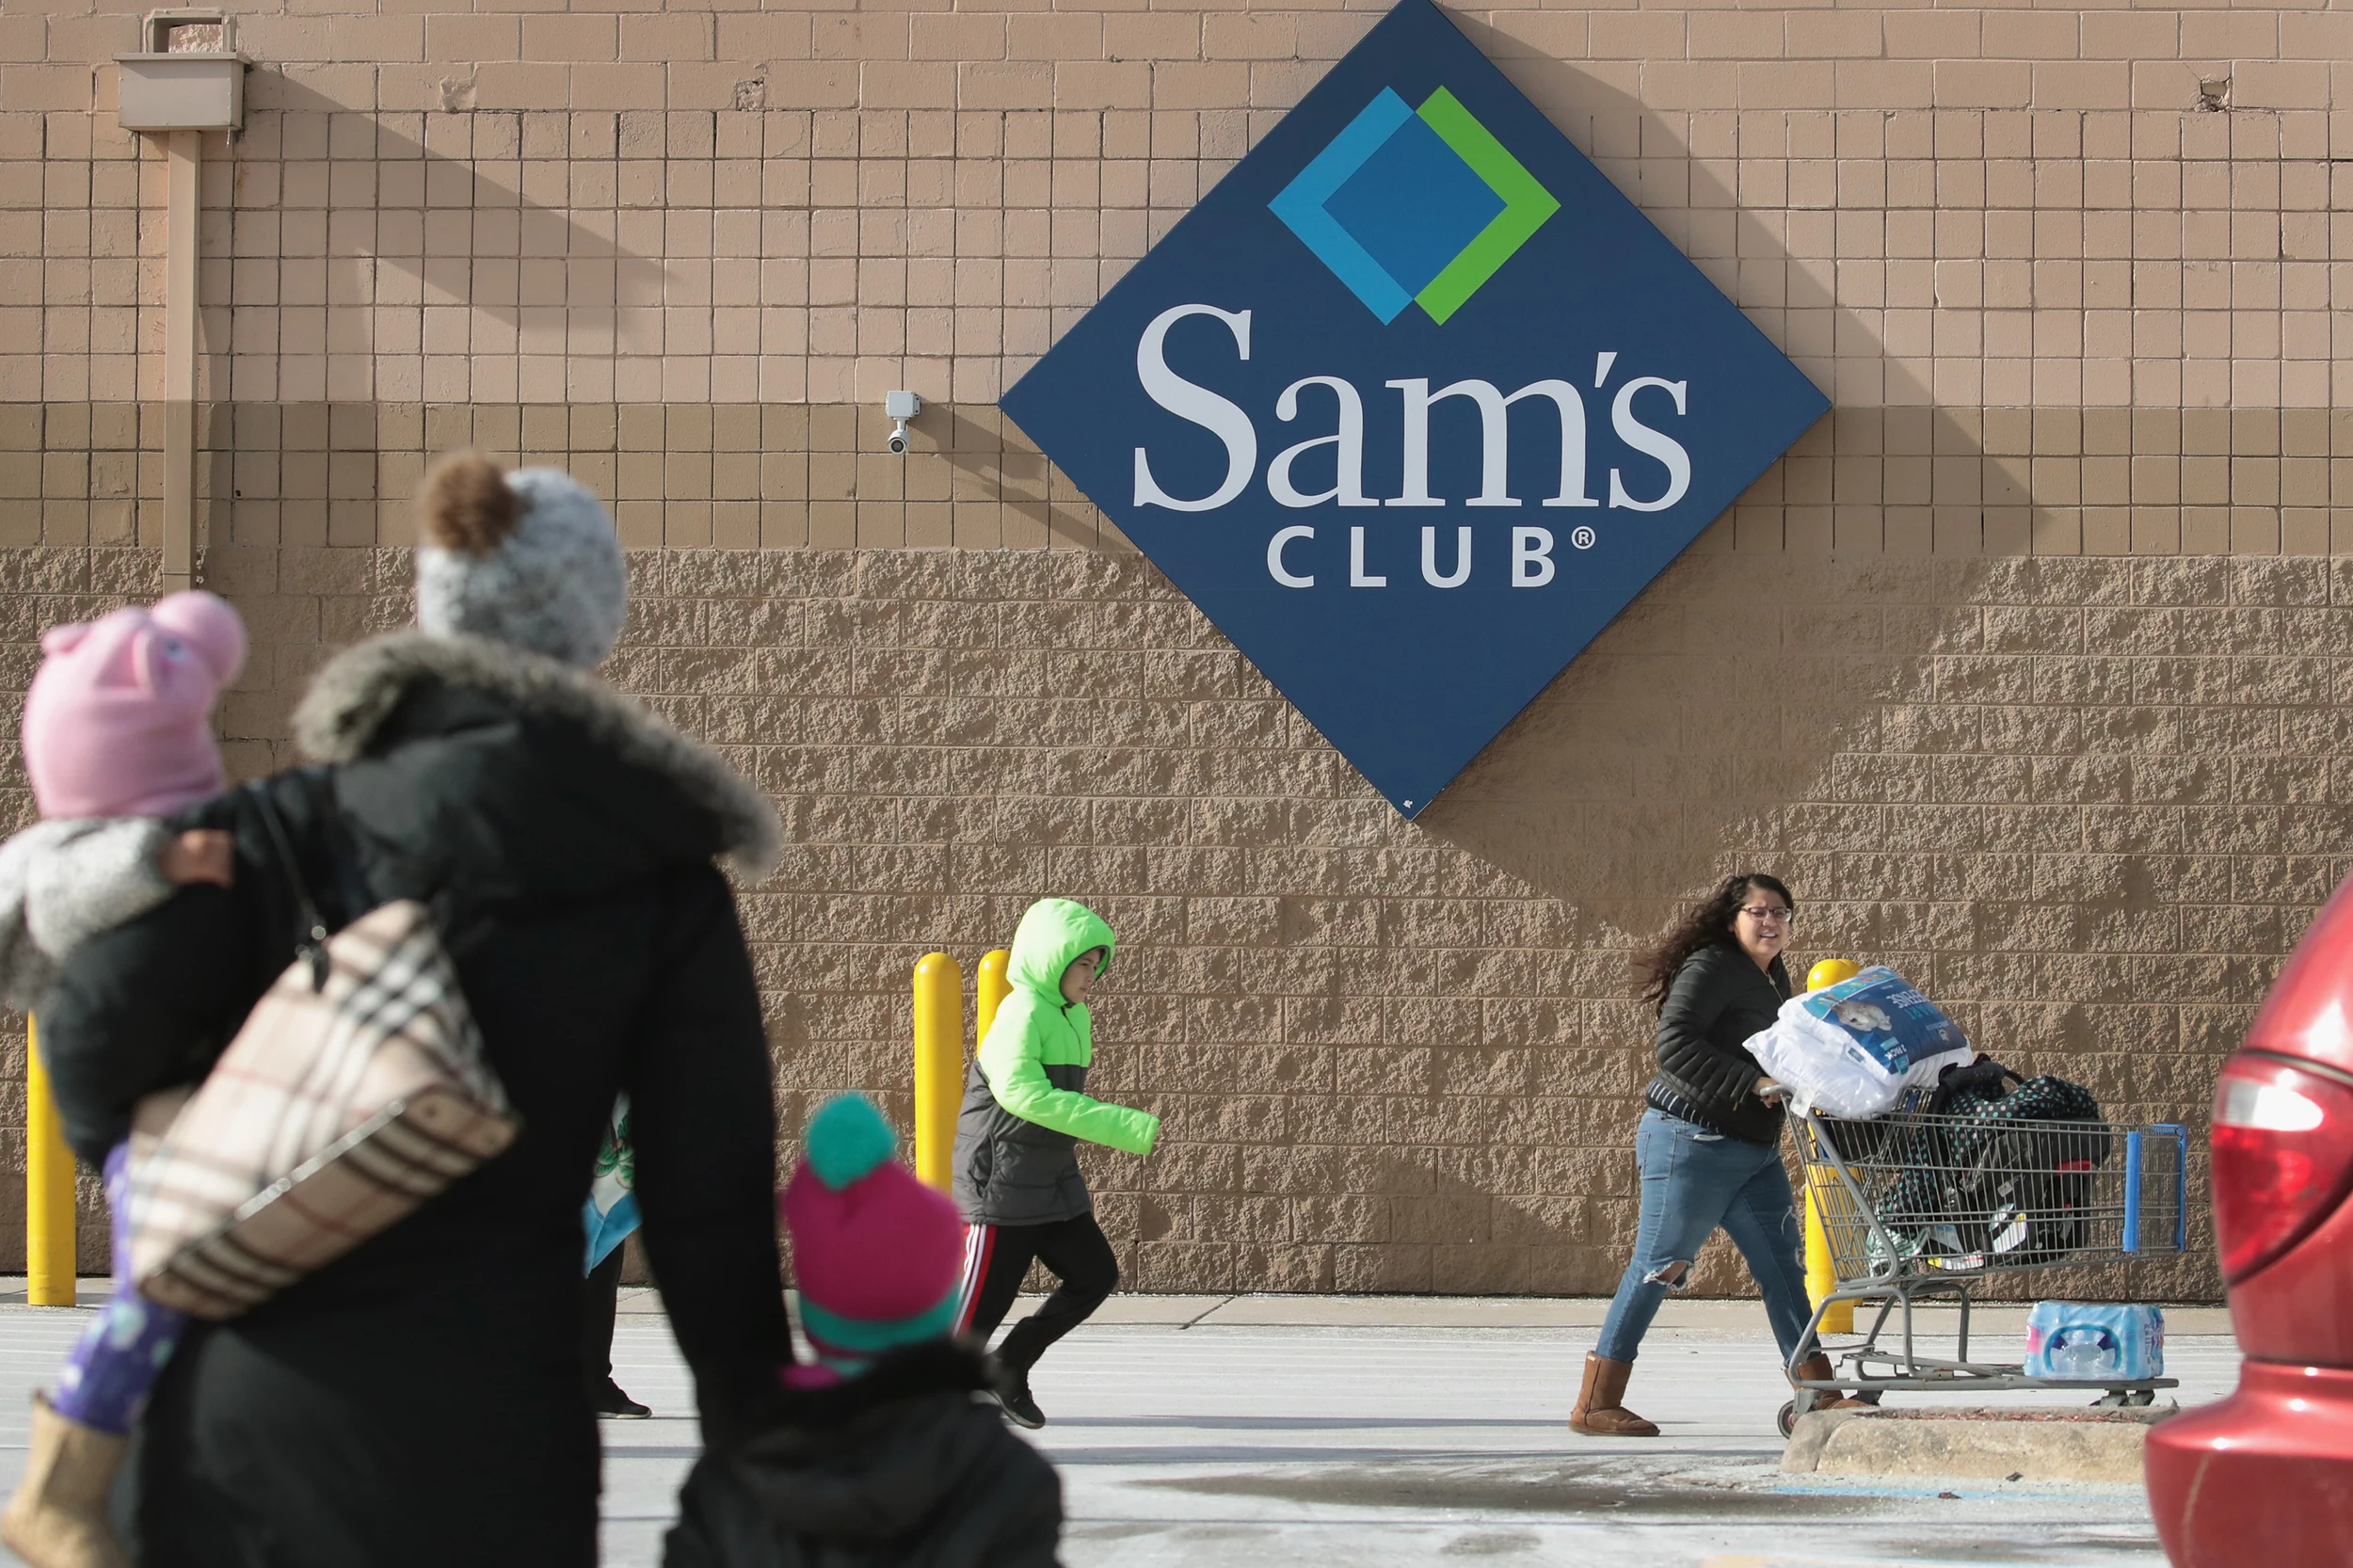 Here's How You Can Shop At Sam's Club Without Being A Member